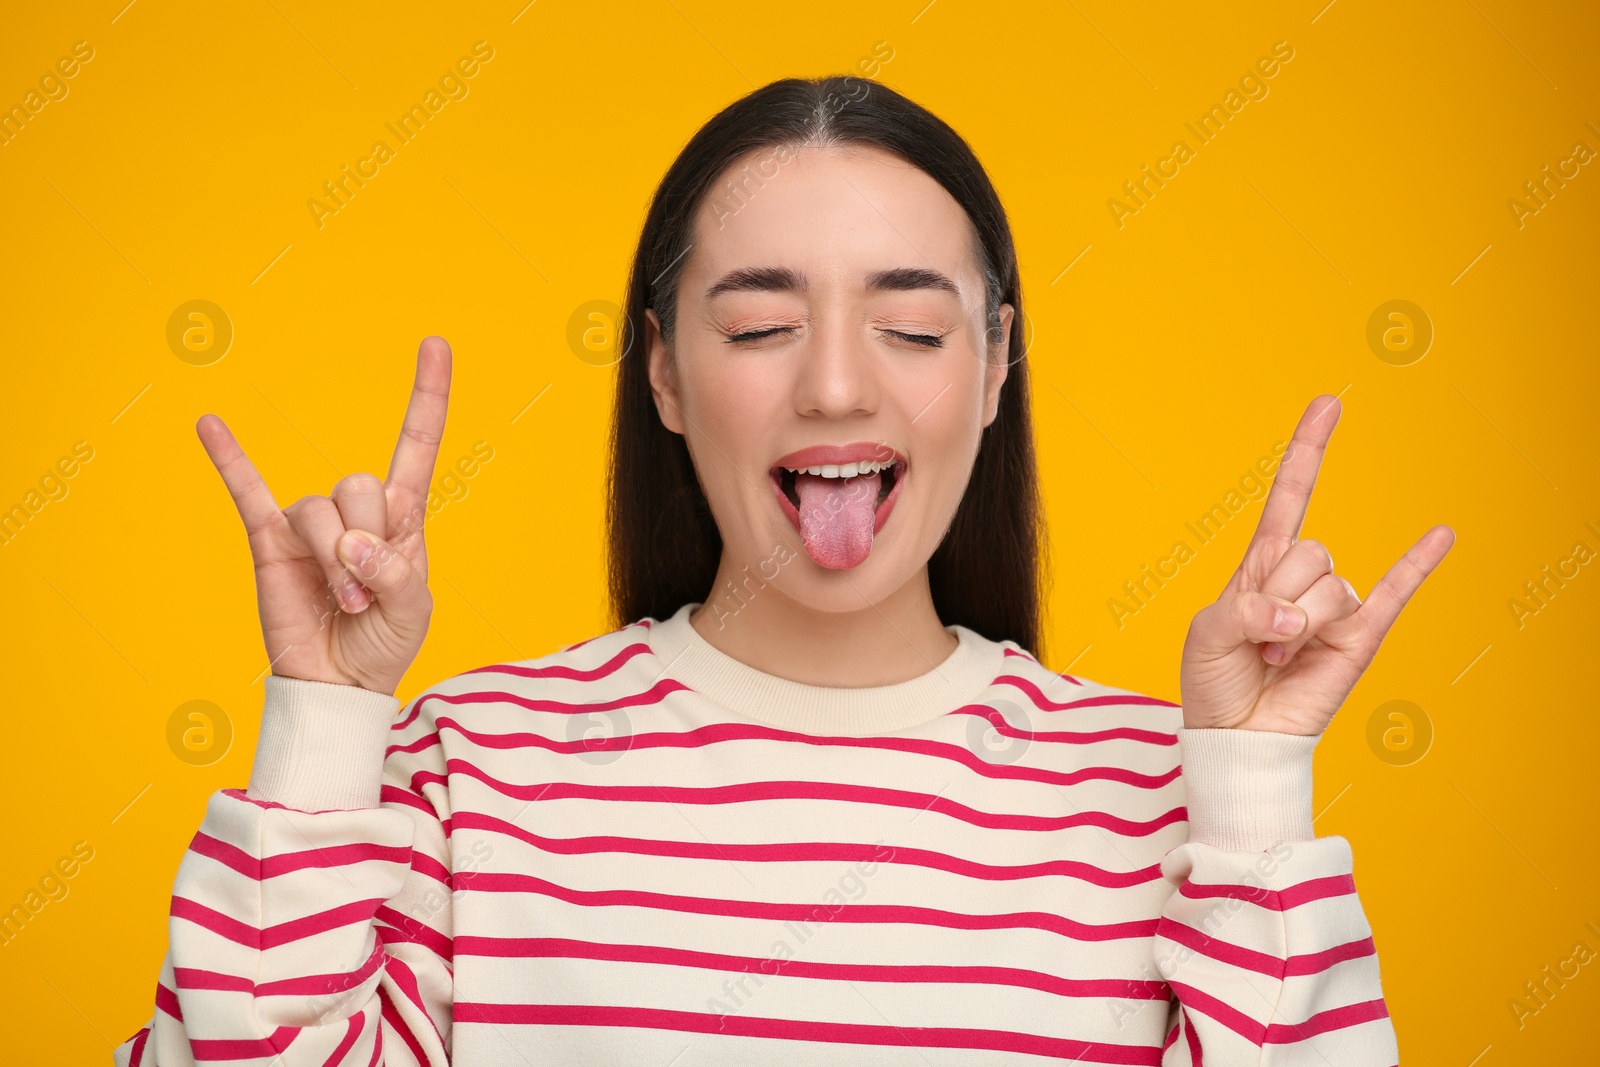 Photo of Happy woman showing her tongue and rock gesture on orange background